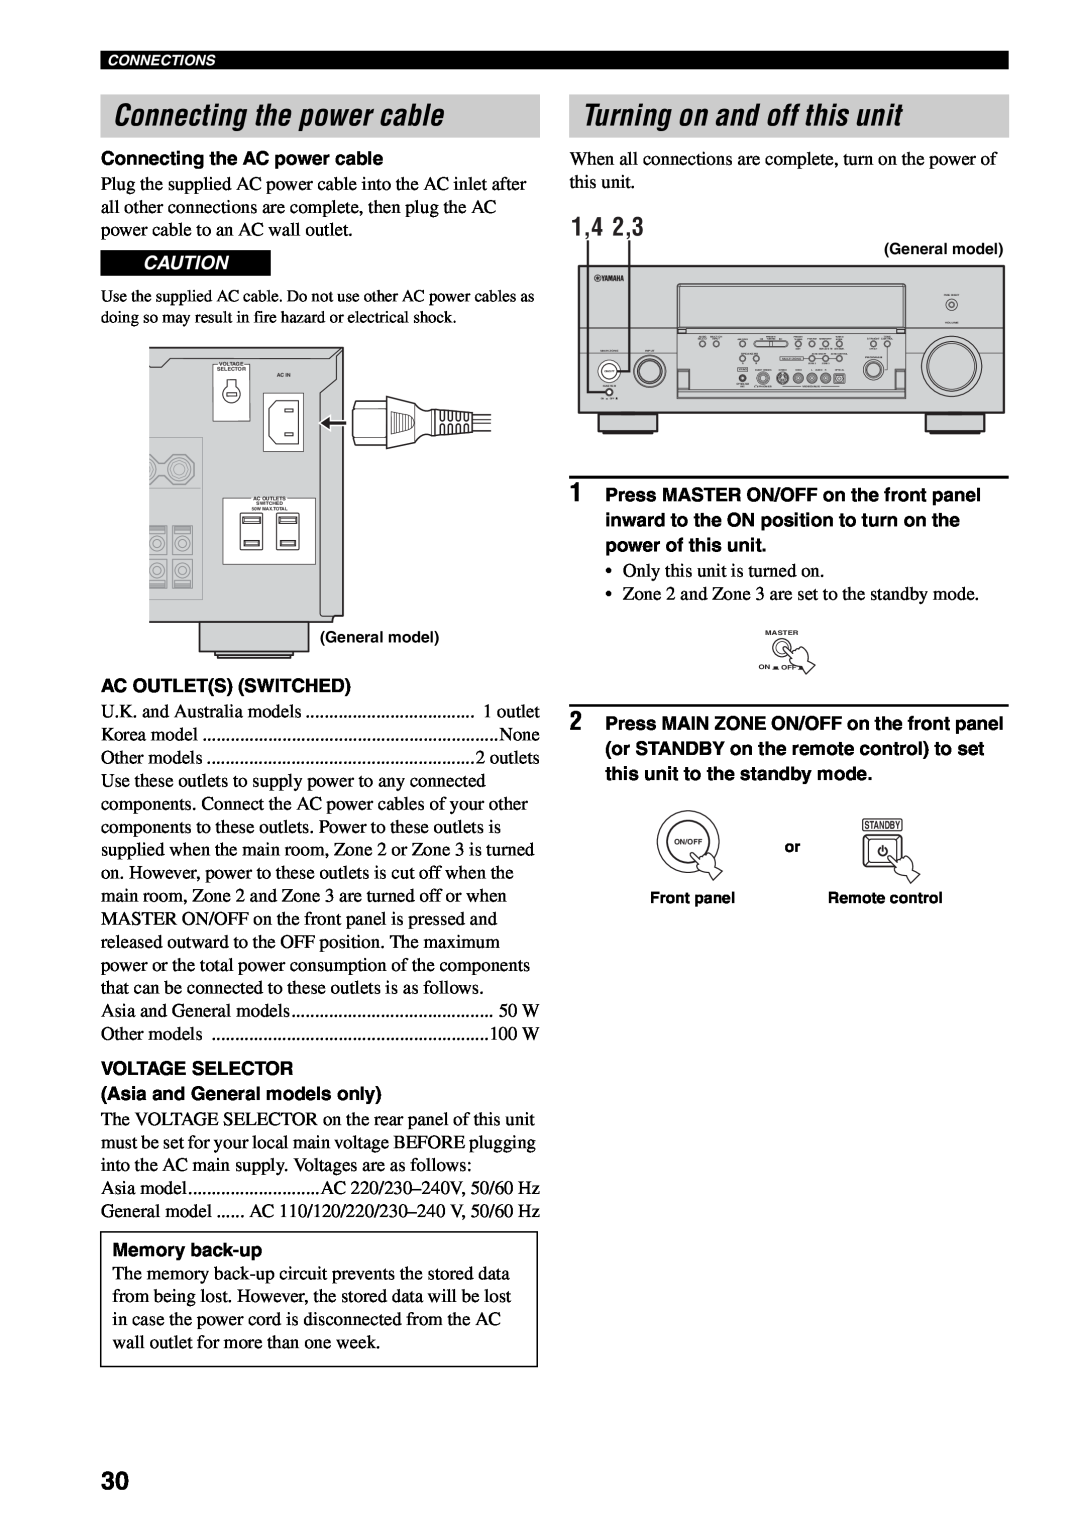 Yamaha RX-V1600 owner manual Connecting the power cable, Turning on and off this unit, 1,4 2,3 